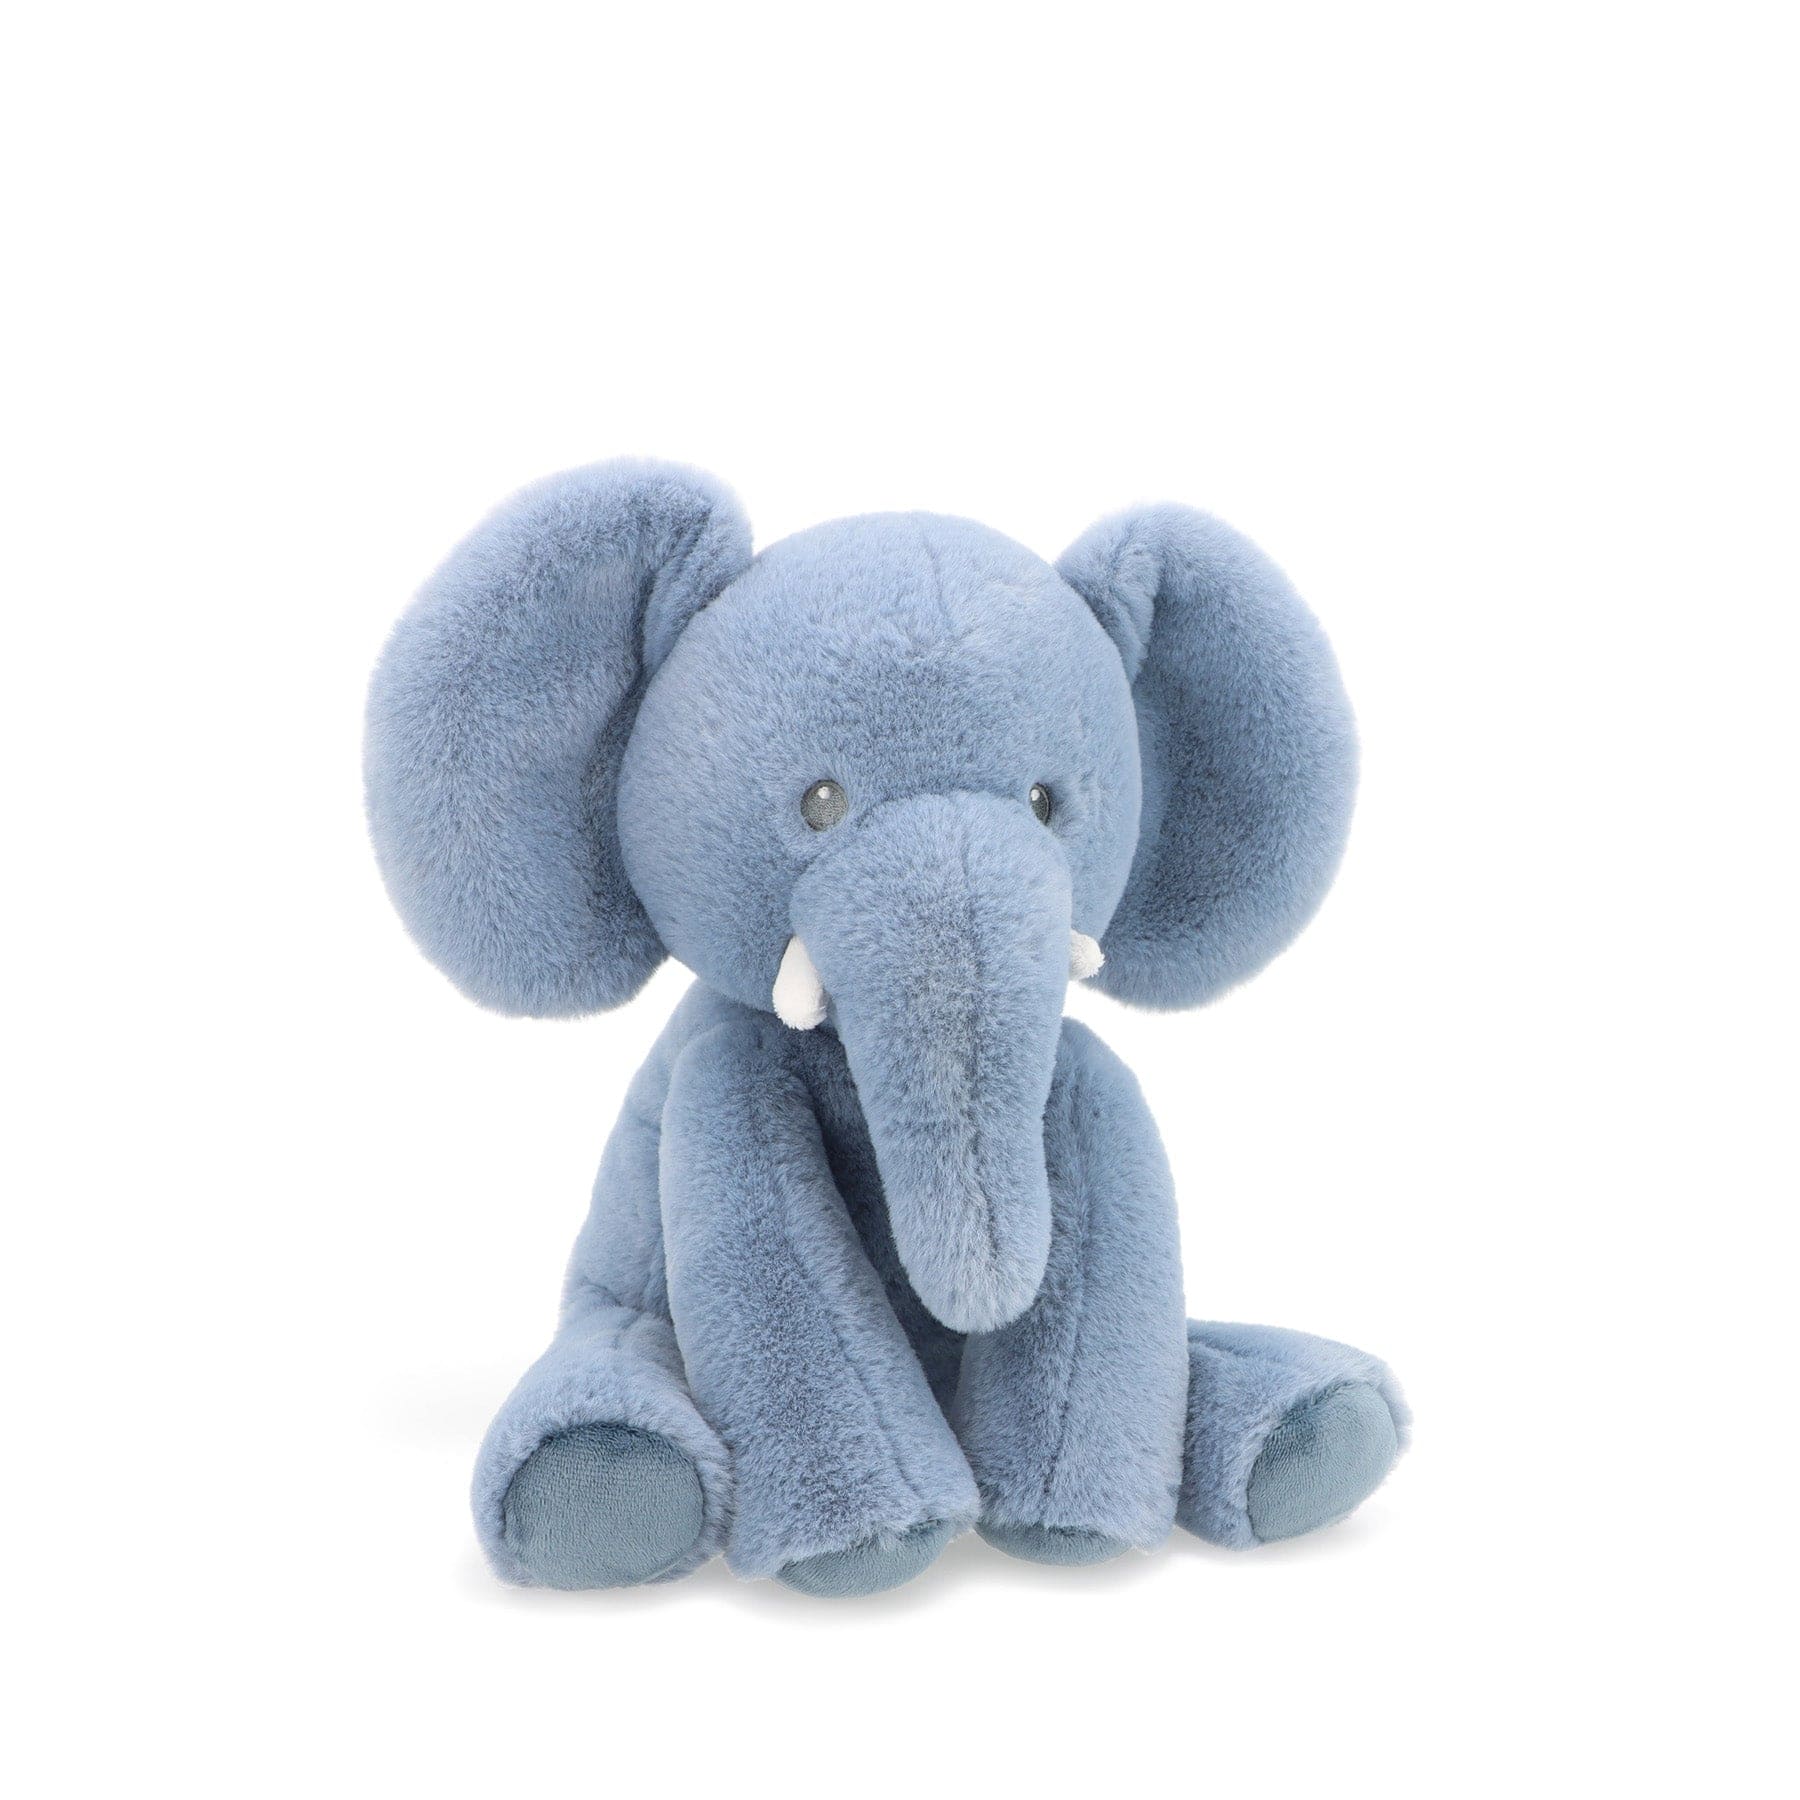 Blue plush elephant toy sitting isolated on white background, cute stuffed animal for children, soft velvety texture, large ears and tusks visible, friendly toy elephant, kid's playroom accessory.